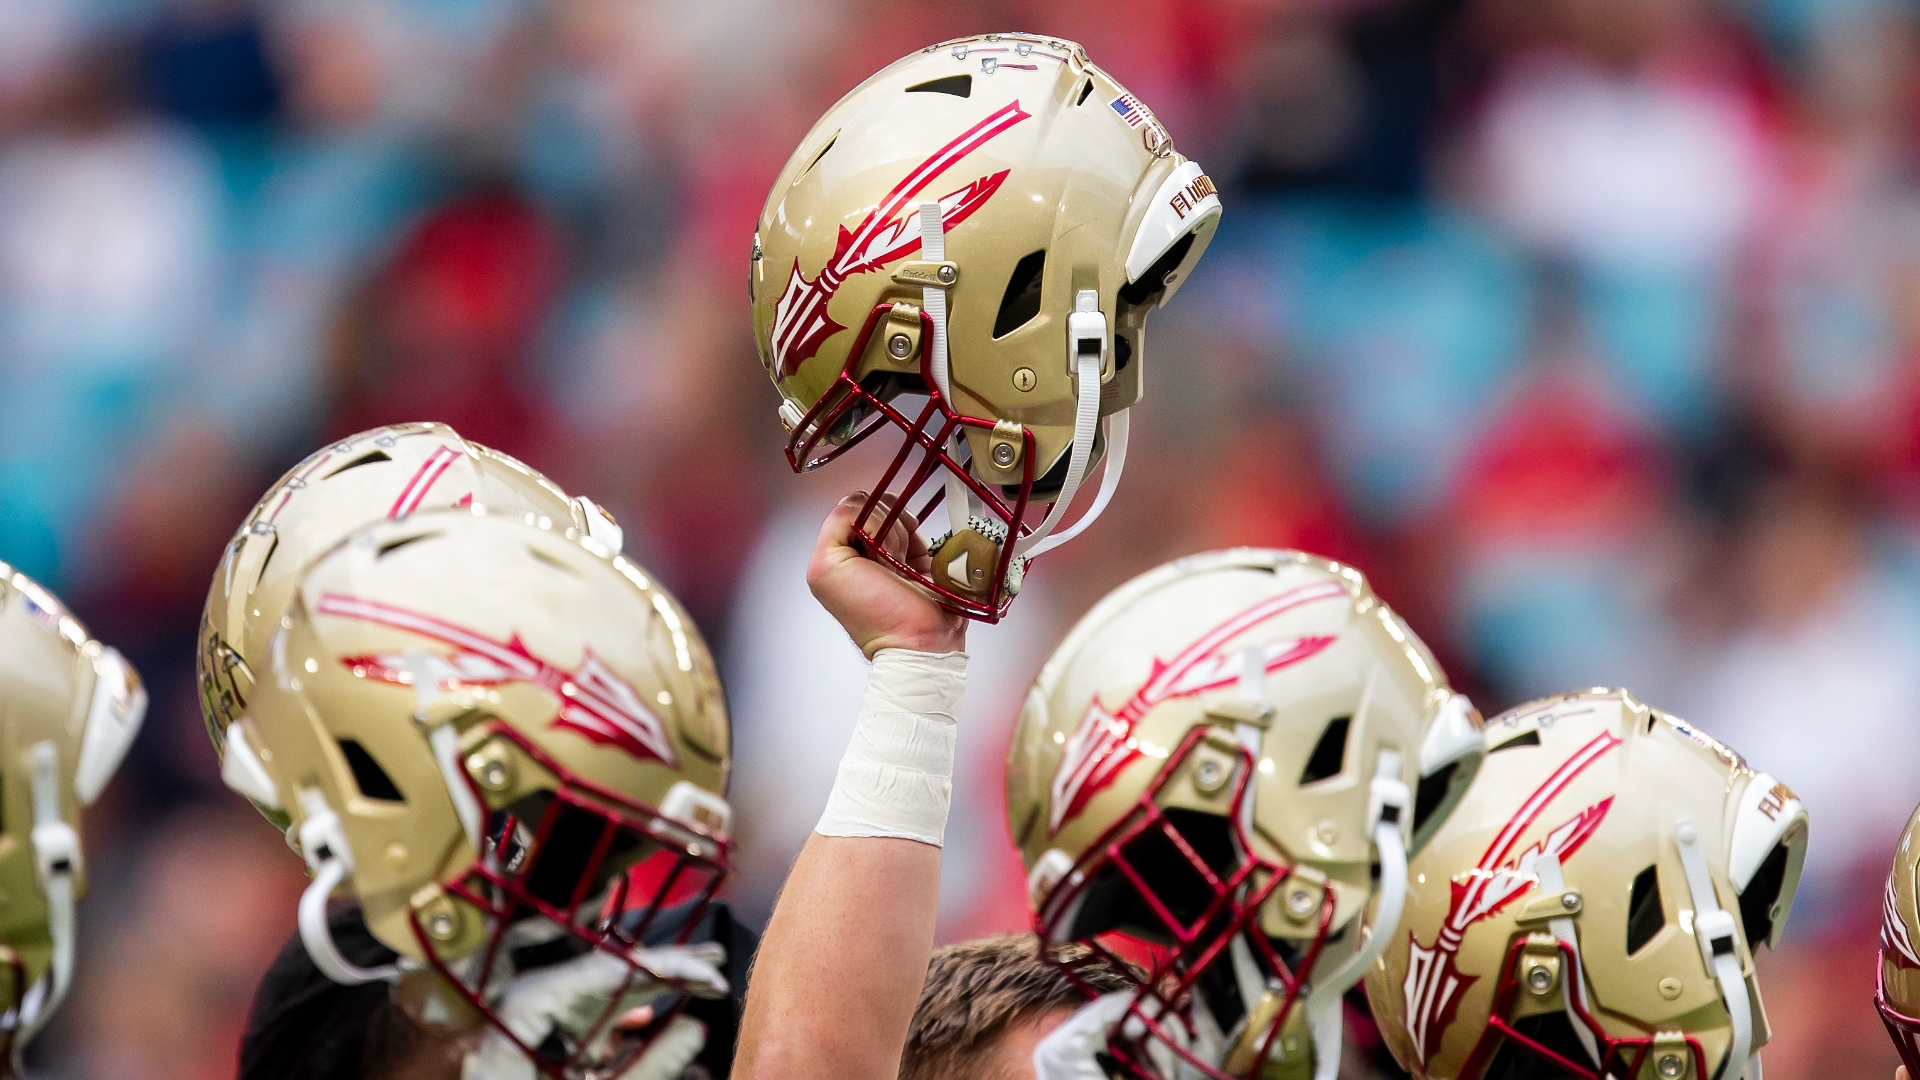 FSU receives substantial penalties for violating NCAA rules on NIL deals